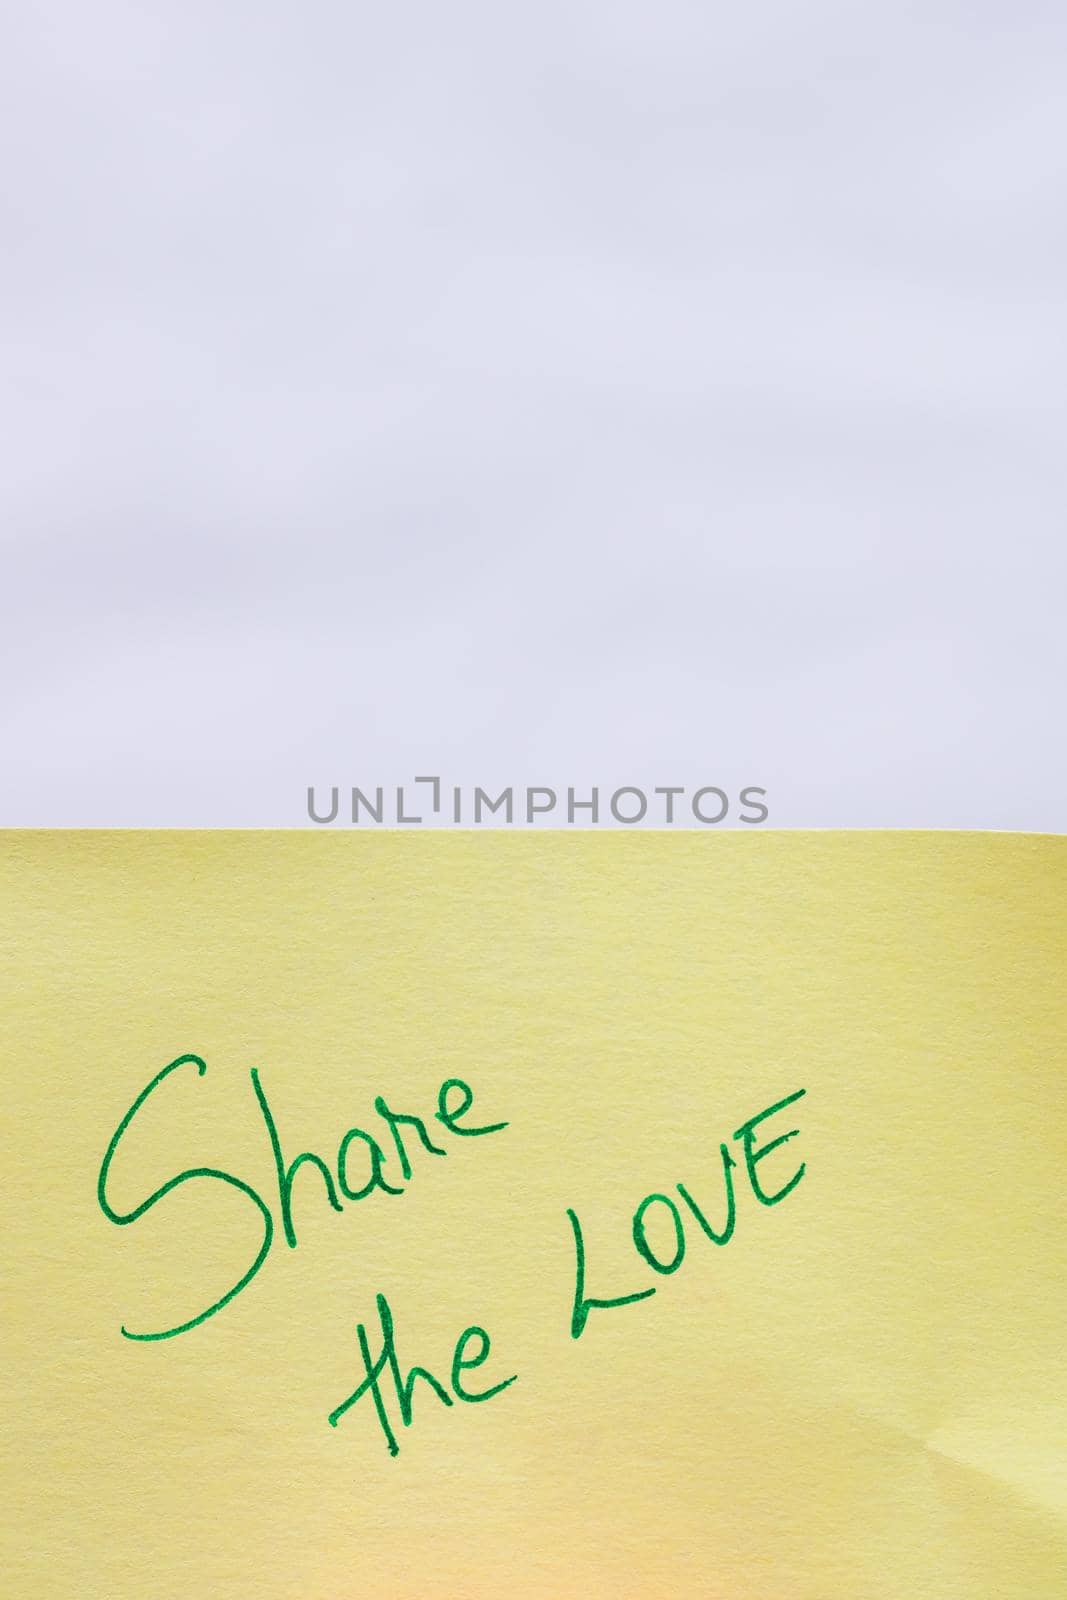 Share the love handwriting text close up isolated on yellow paper with copy space.